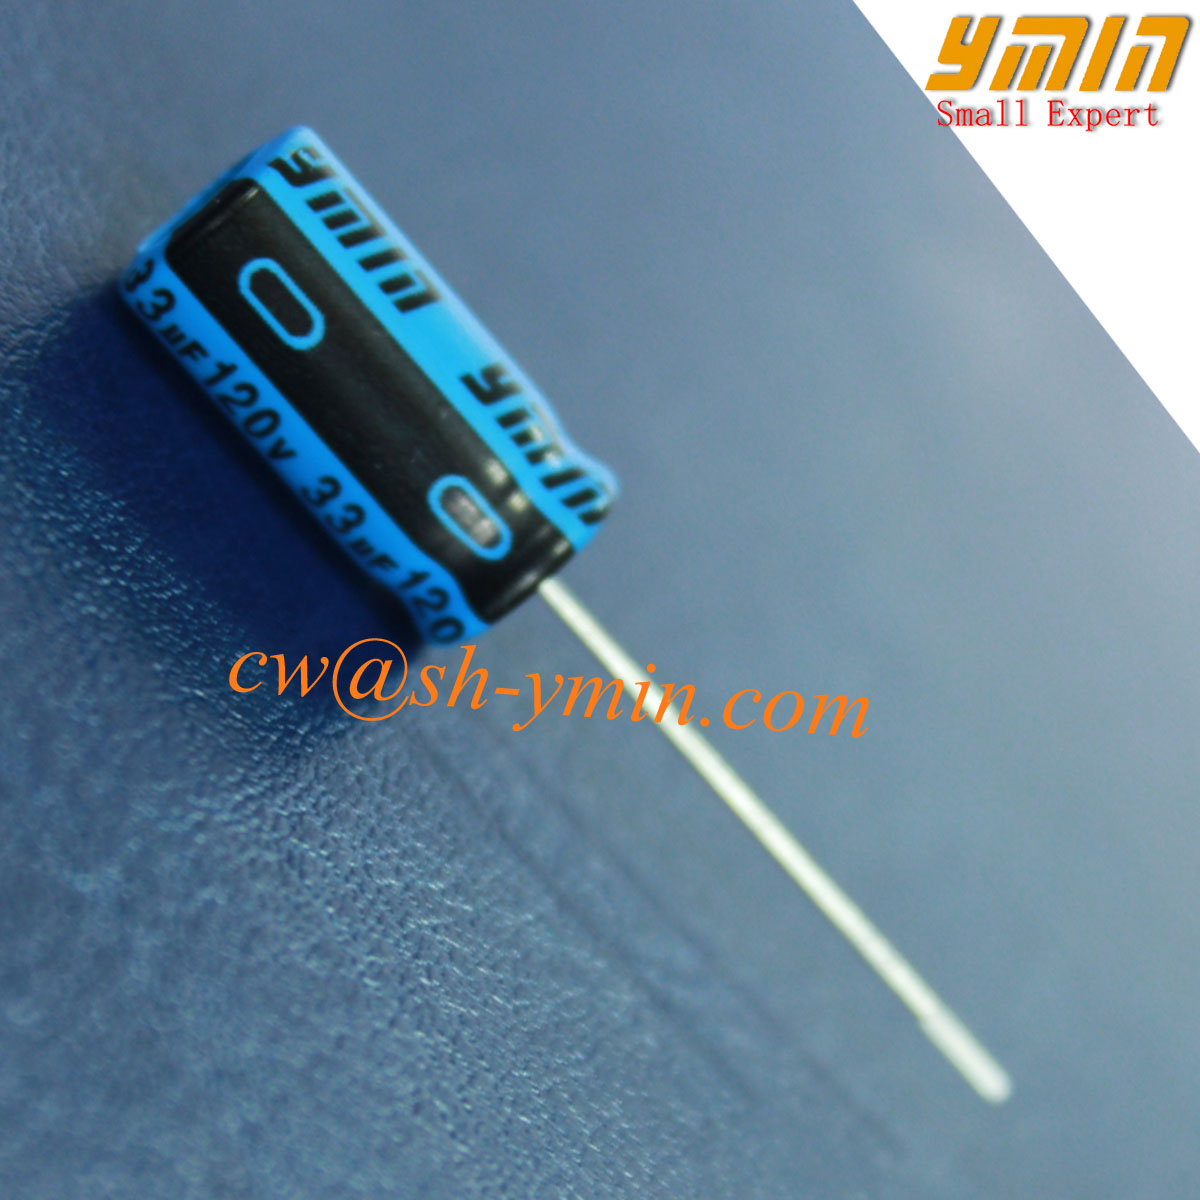 Low LC Capacitor Radial Aluminium Electrolytic Capacitor for LED Ceiling Light RoHS